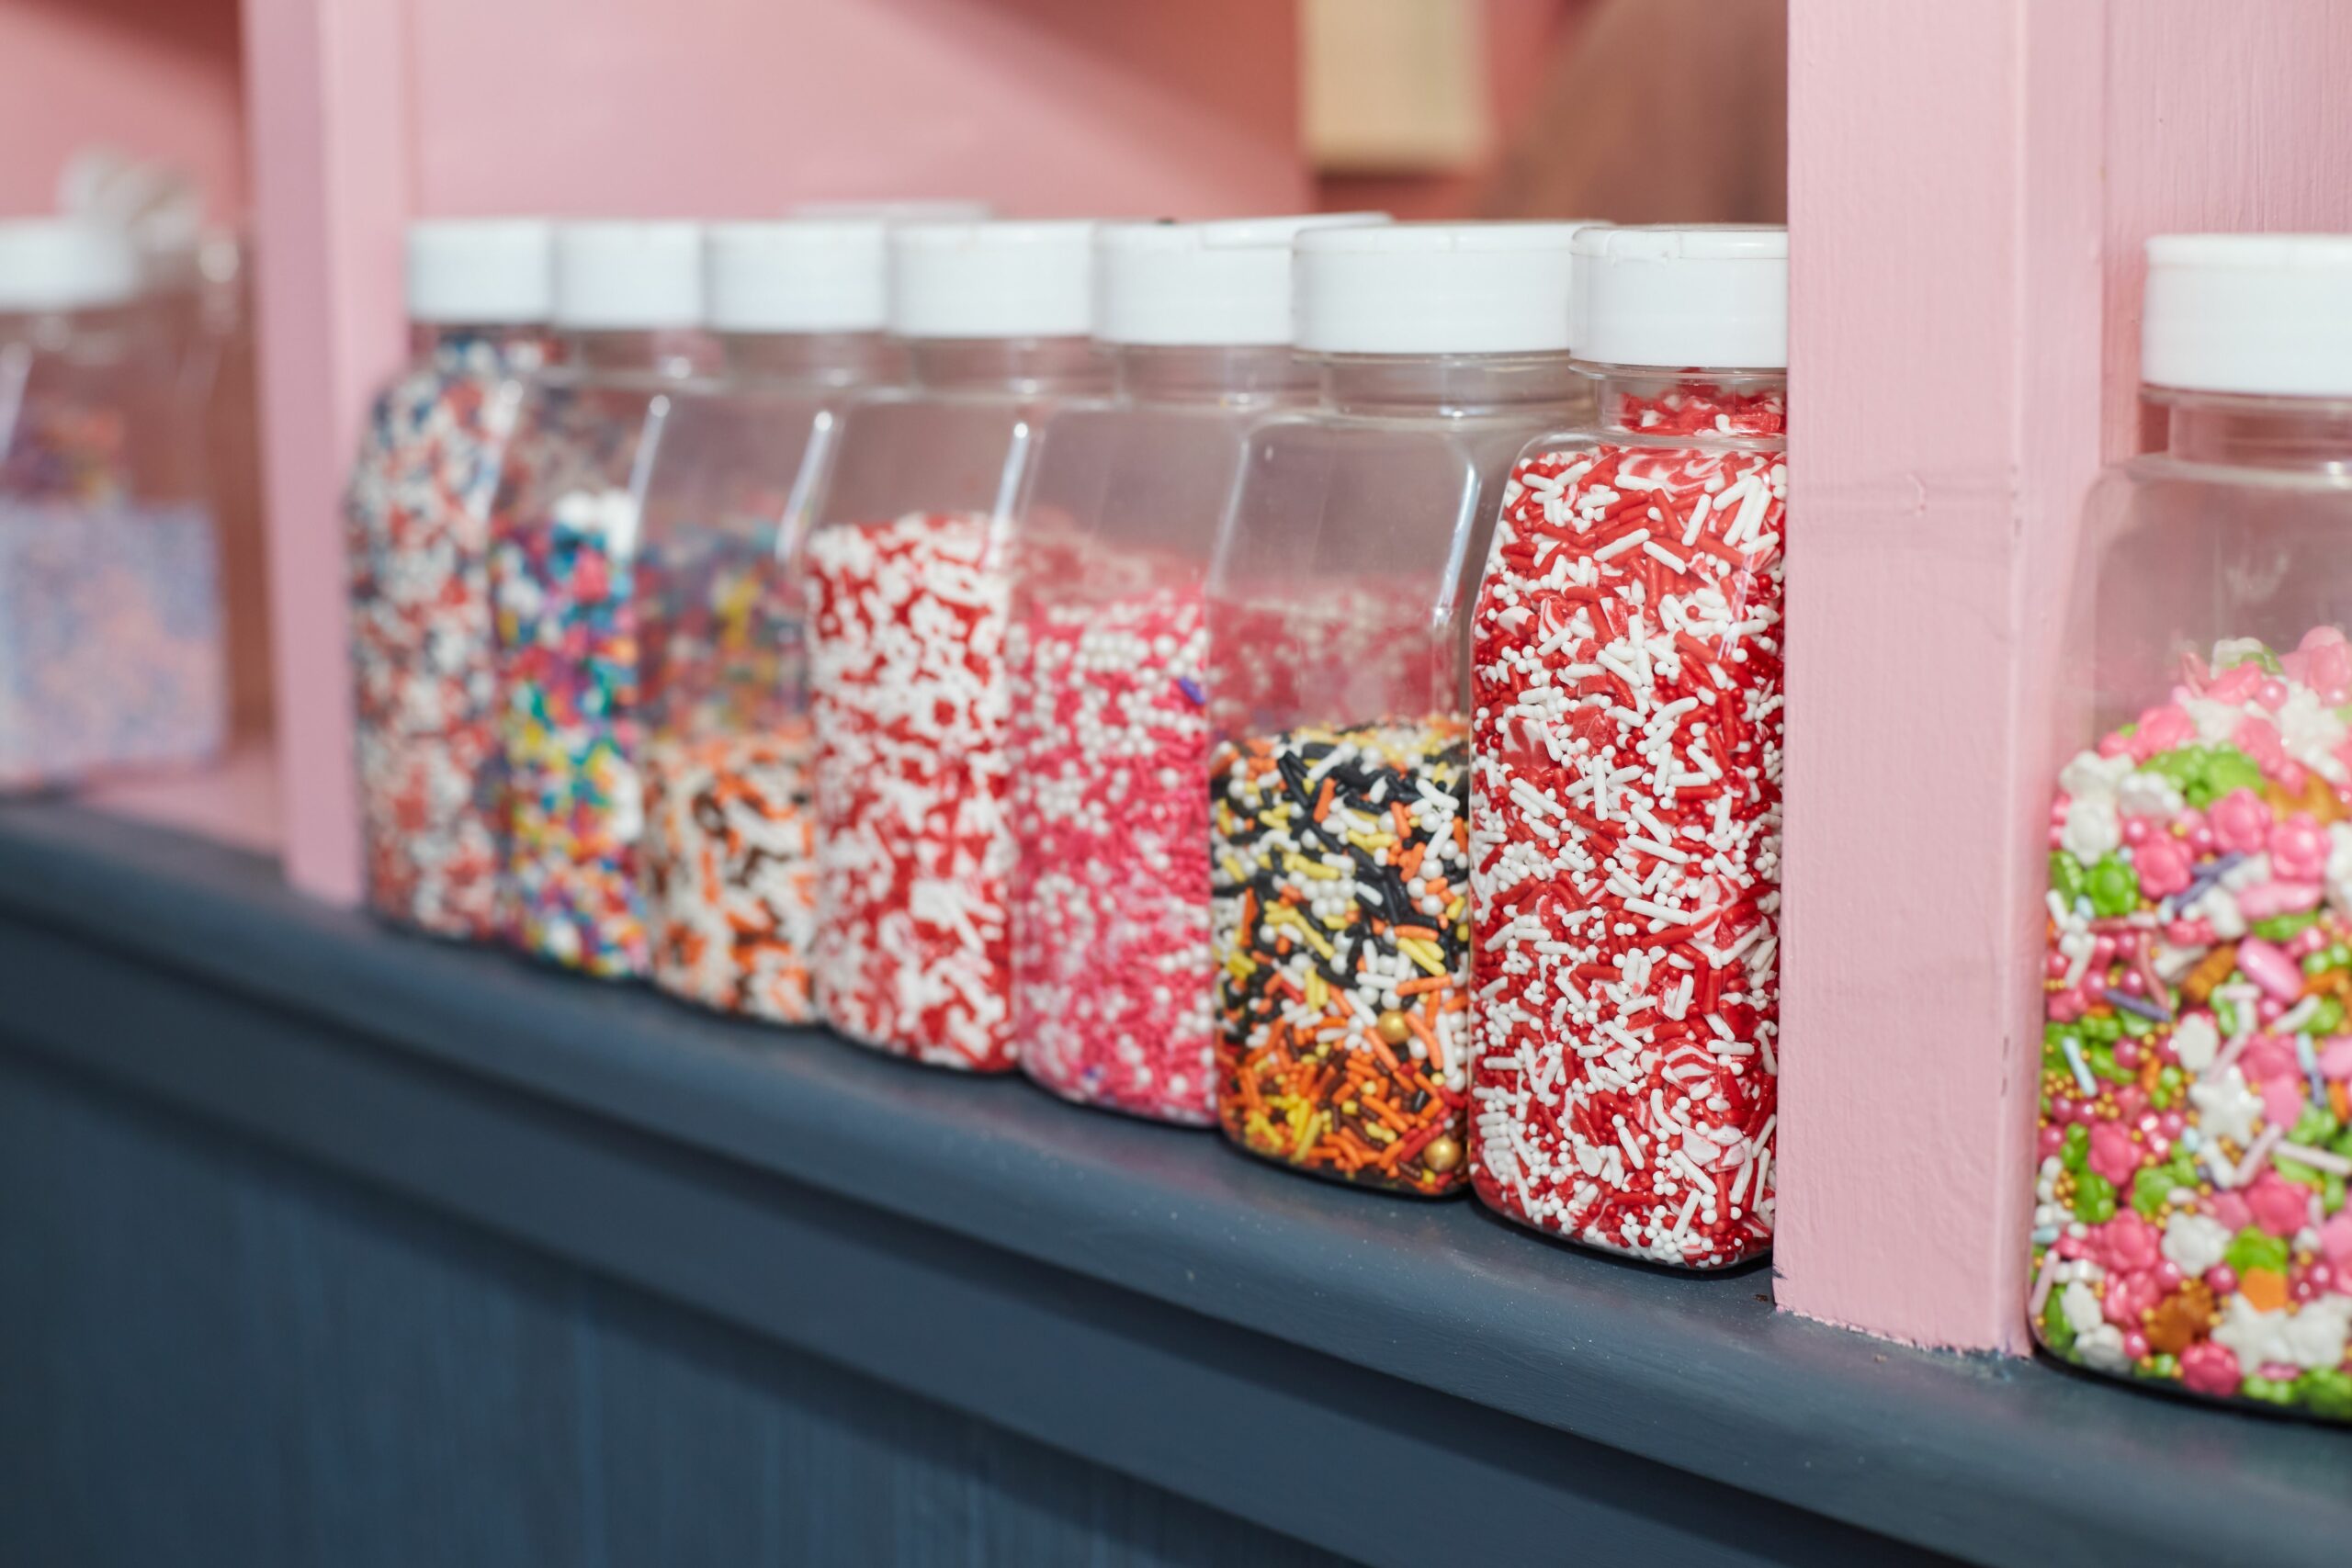 Jars of sprinkles at Sweet Dough Bake Shop in High Point, NC.